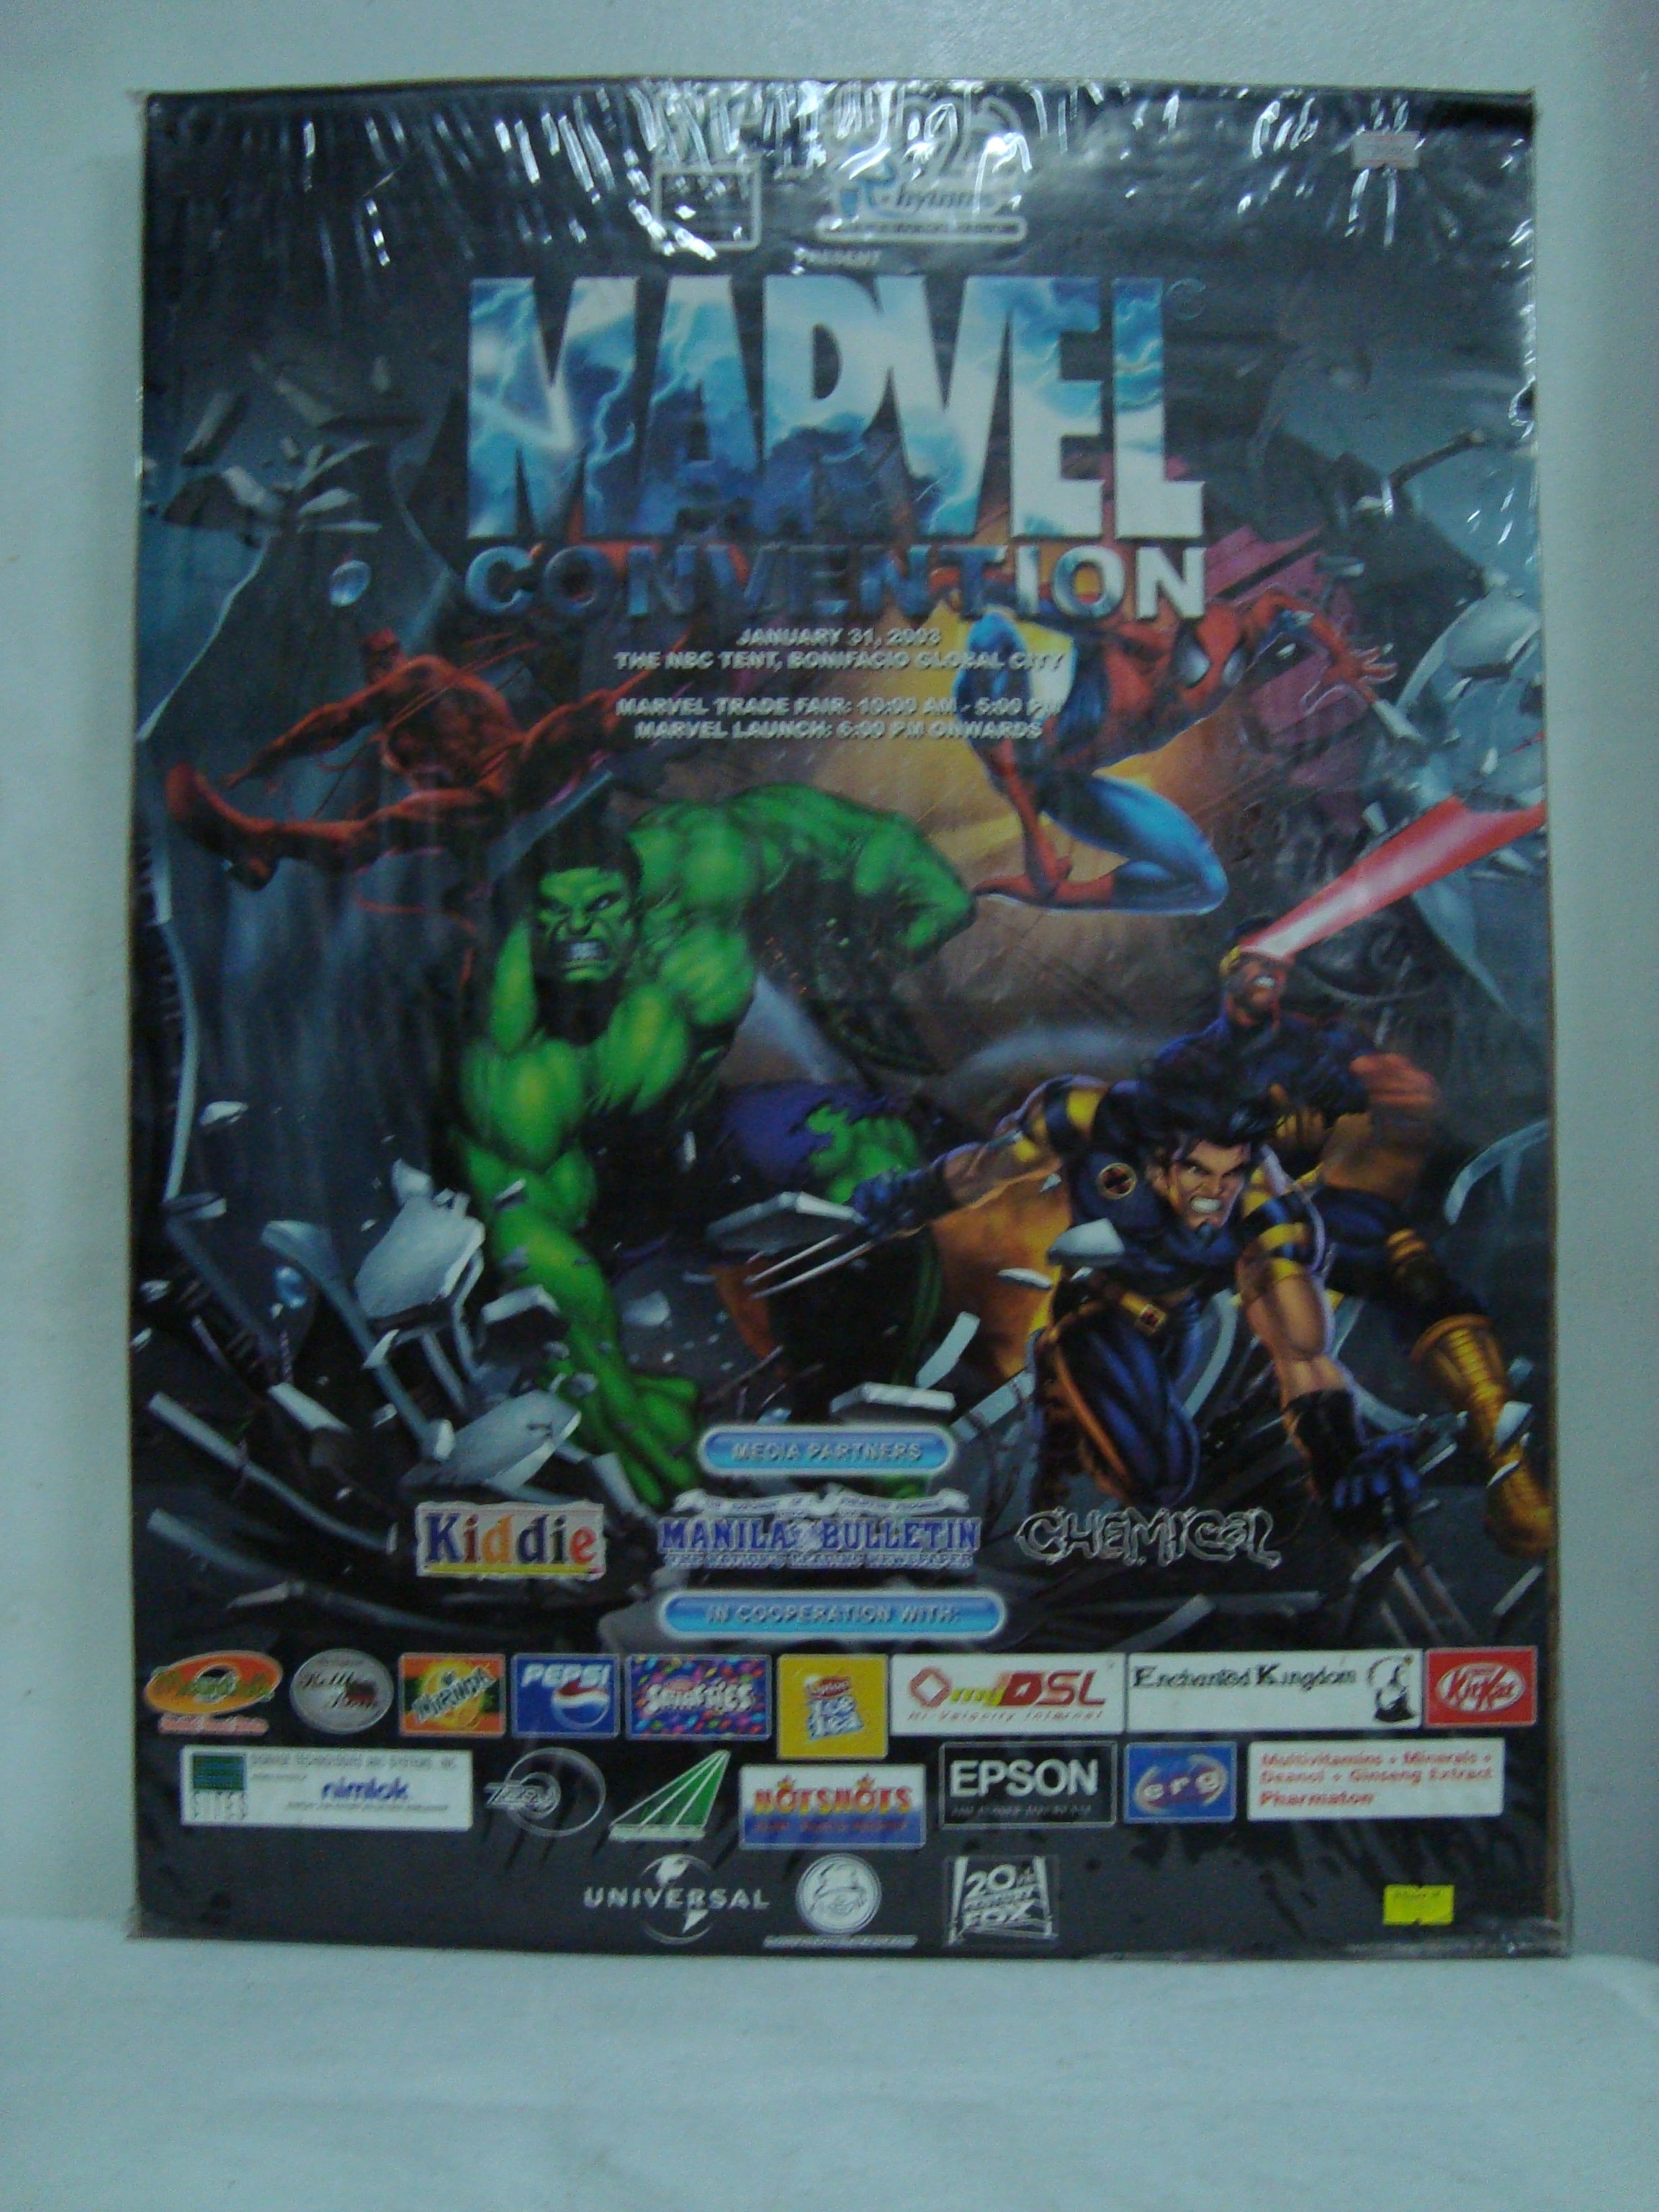 Marvel Convention Poster 2003